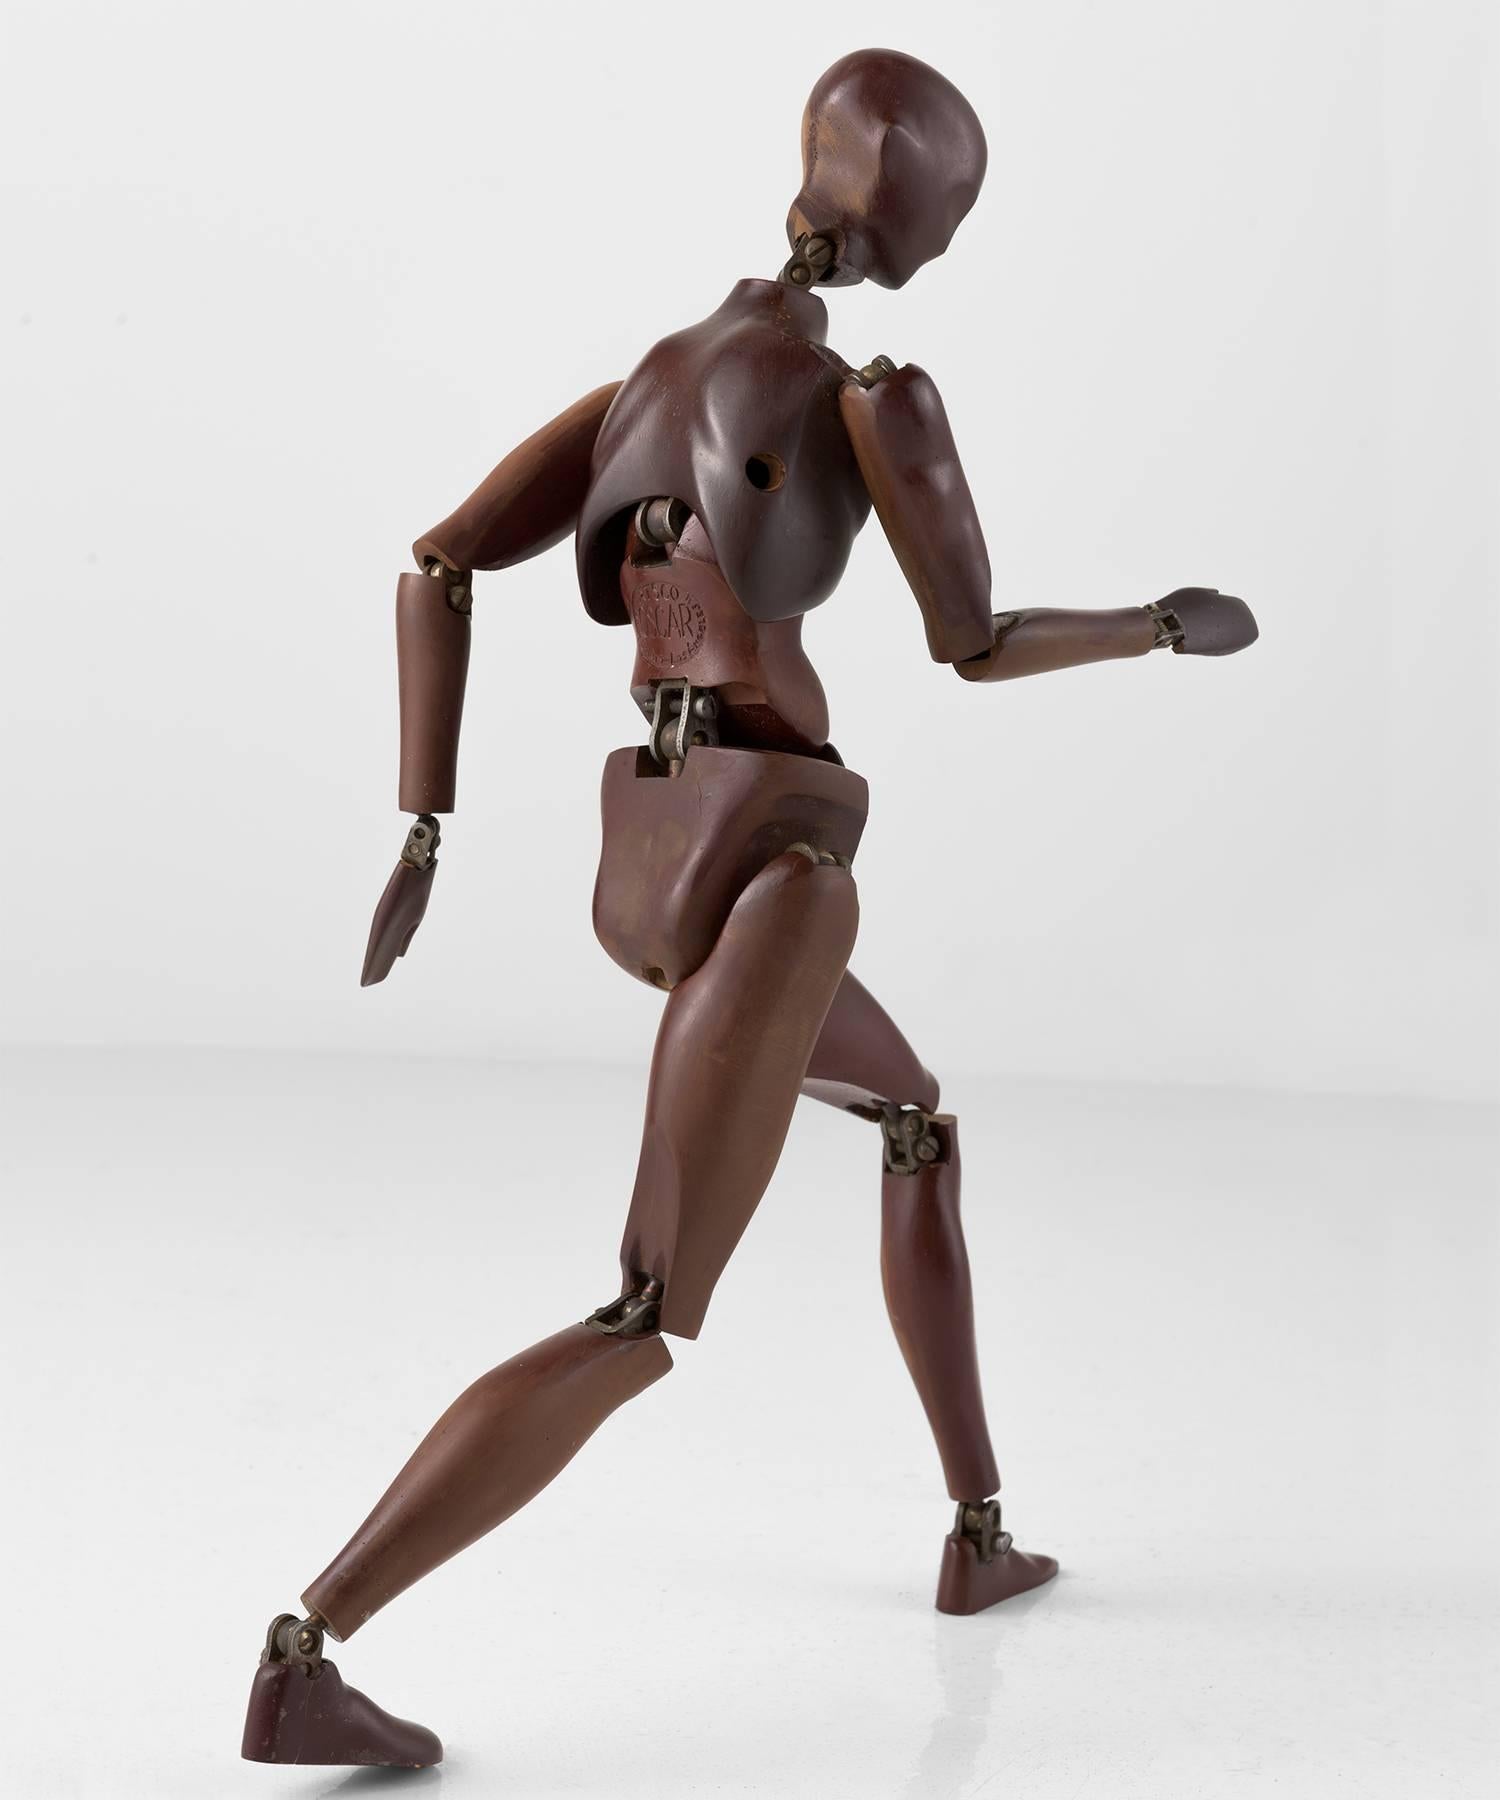 Atsco “Oscar” Artist Mannequin

Molded bakelite limbs and machined steel screws and joints. Amazing flexibility and articulation. 

Made in Los Angeles, CA circa 1930.

 